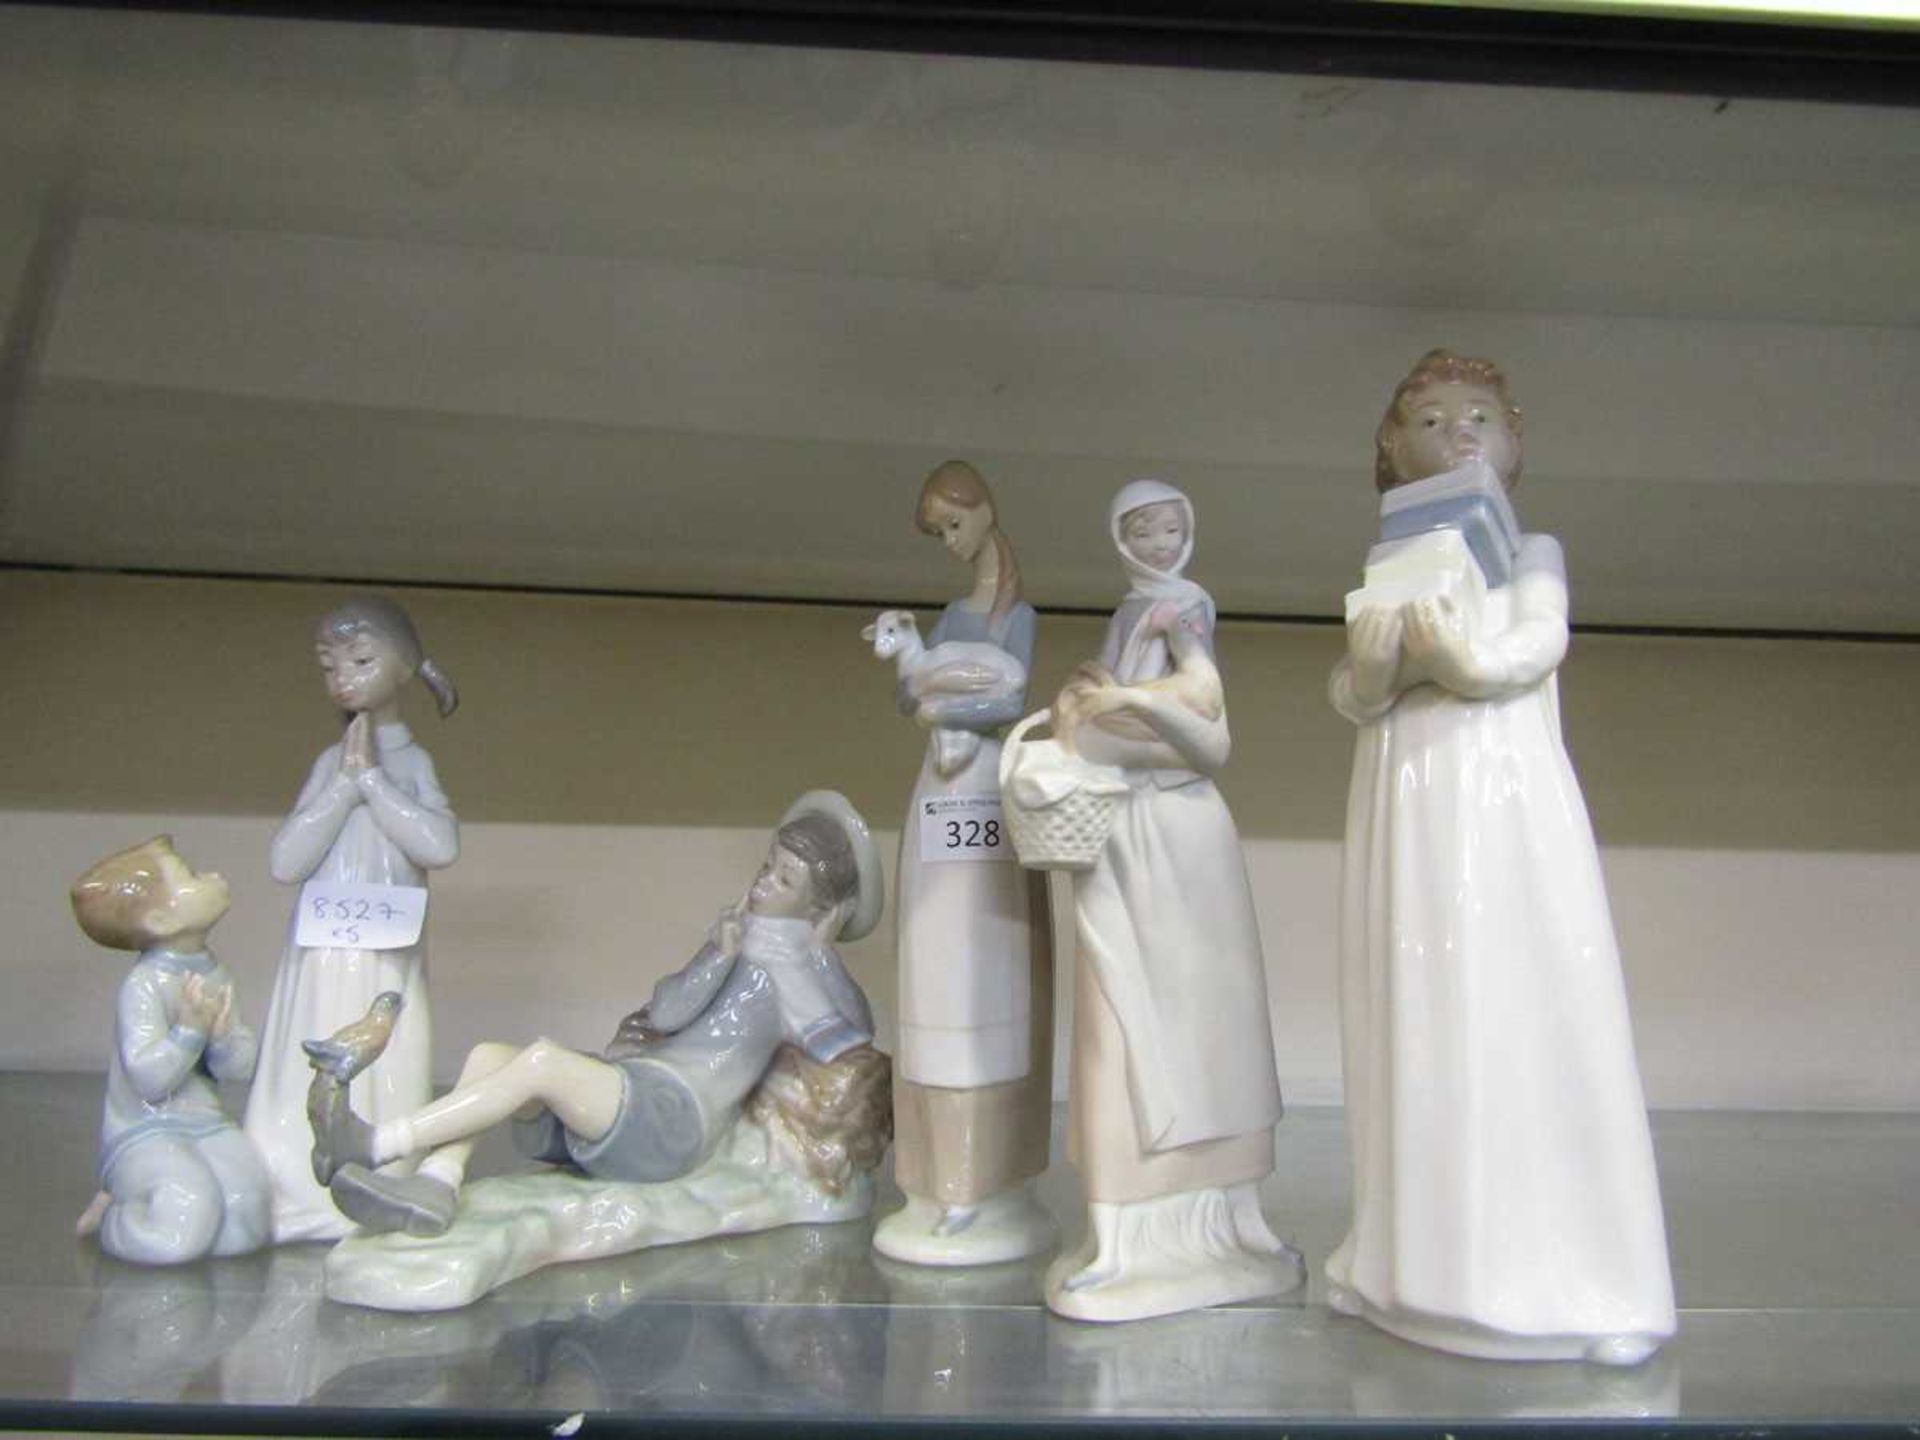 Lladro ceramic figurines along with one Nao figurine consisting of young girl and boy praying,